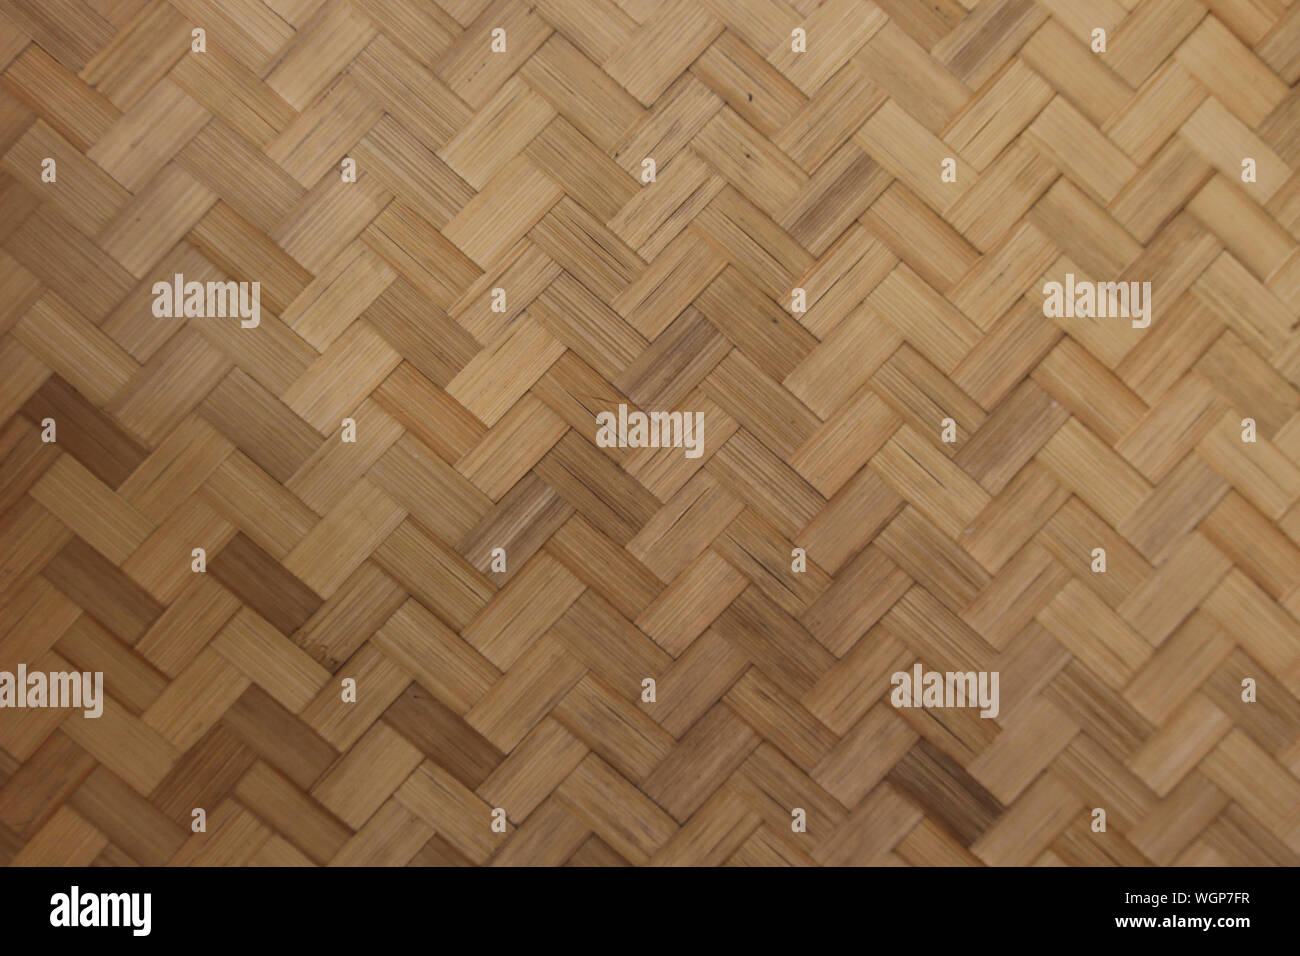 Woven Bamboo Mat High Resolution Stock Photography And Images Alamy